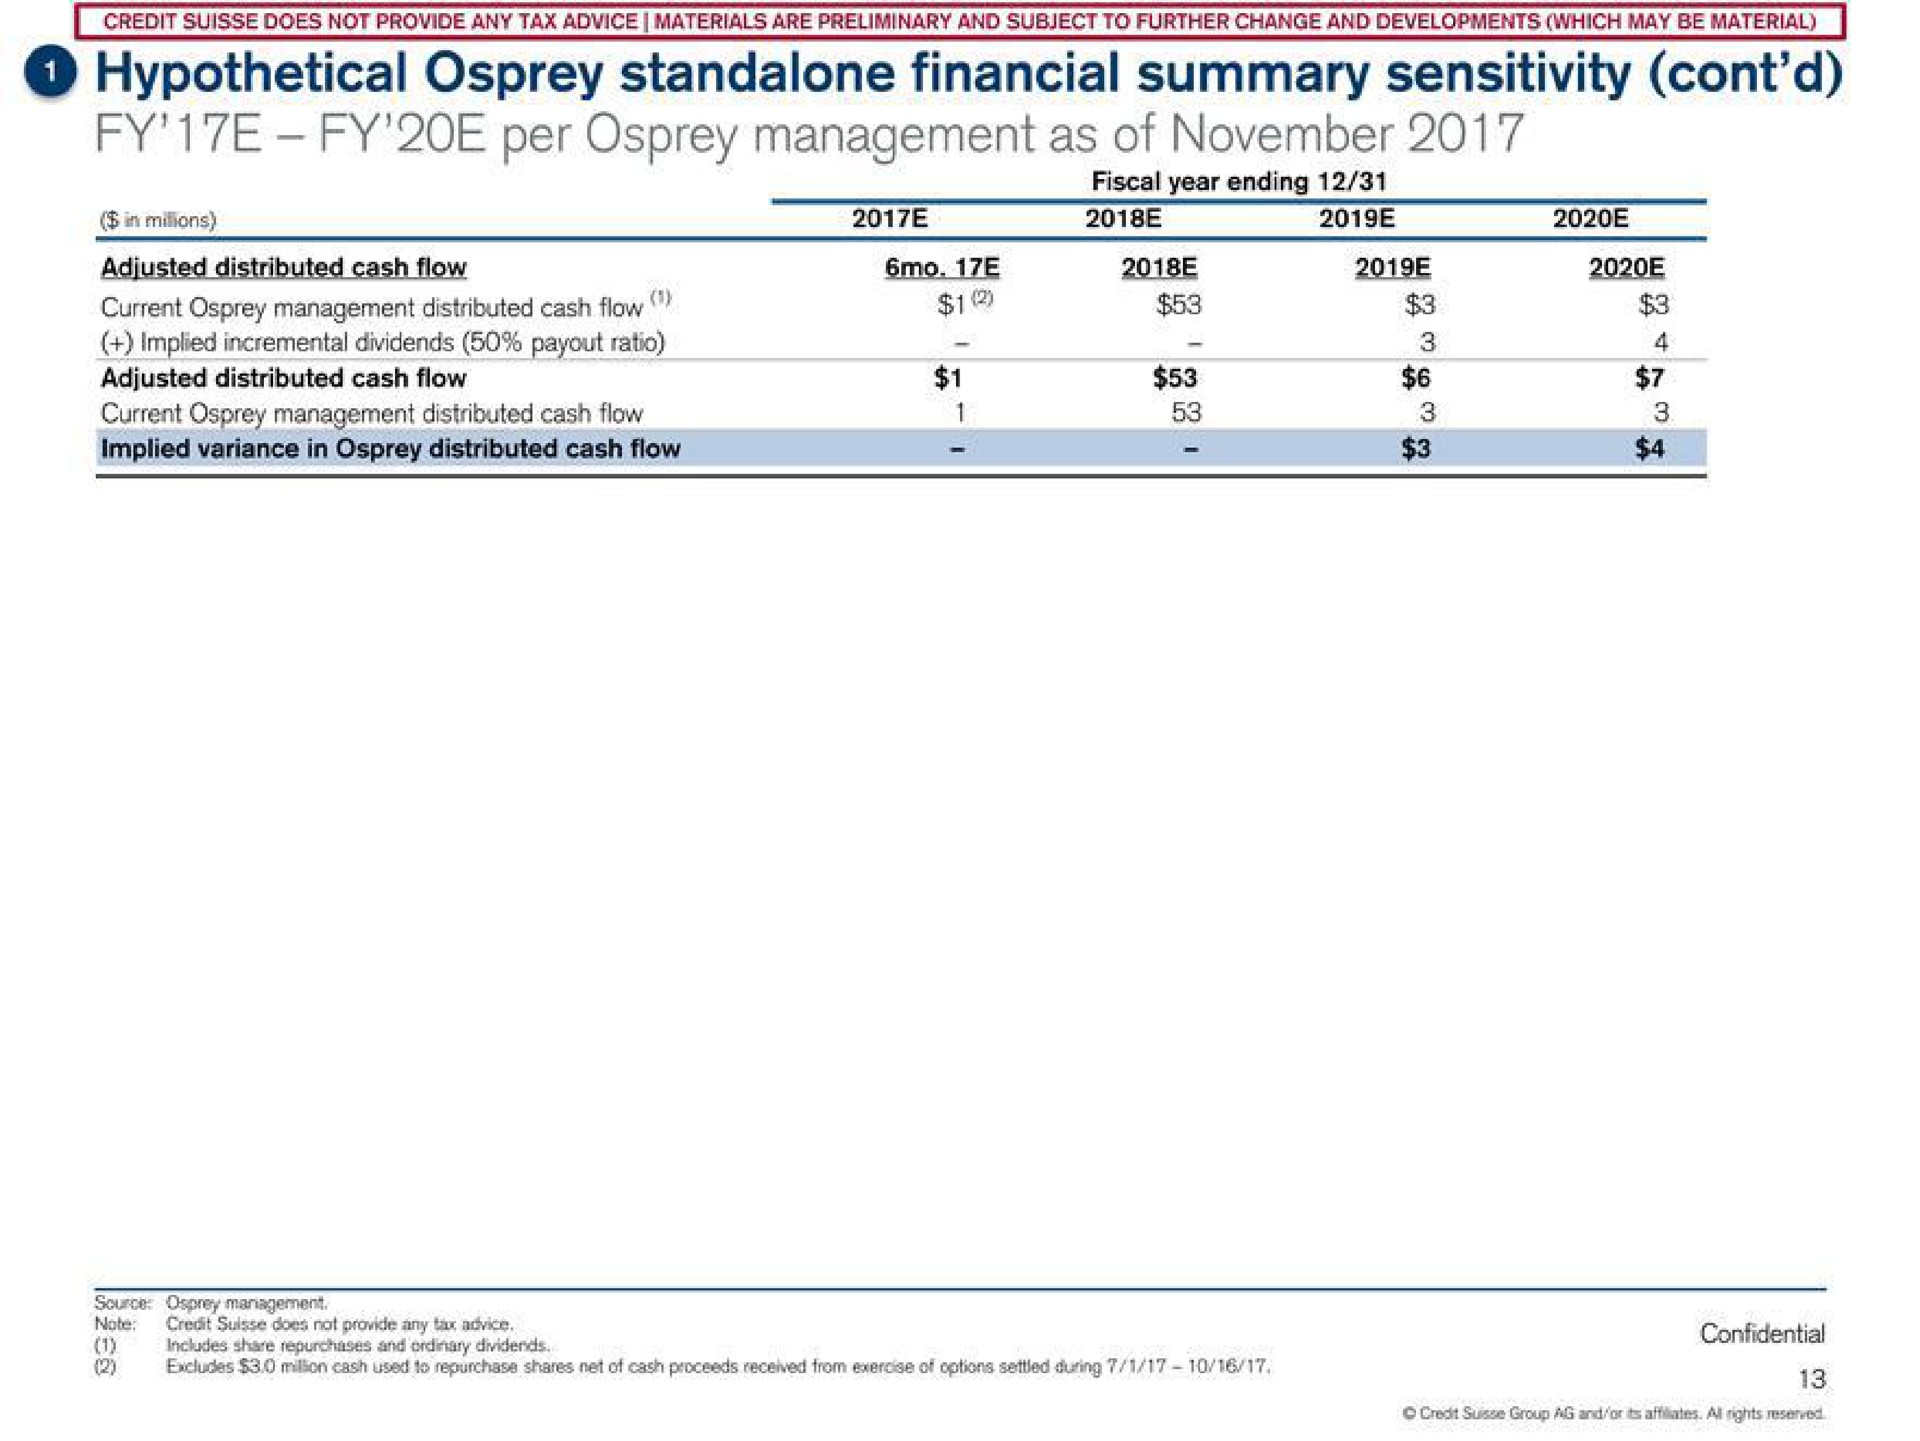 hypothetical osprey financial summary sensitivity per osprey management as of | Credit Suisse